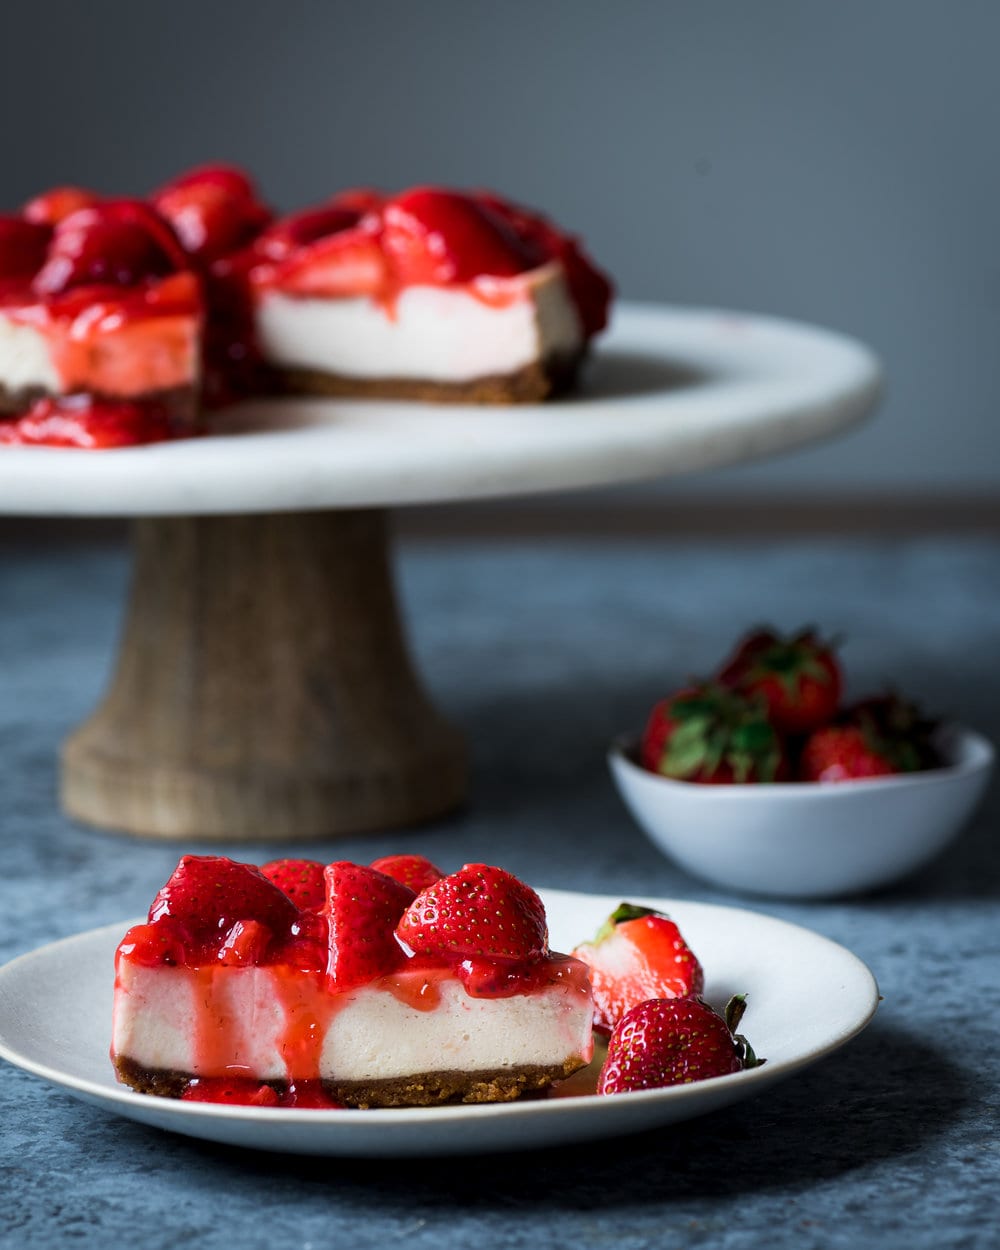 Slice of cheesecake with strawberries on a plate in front of rest of cheesecake on a stand.